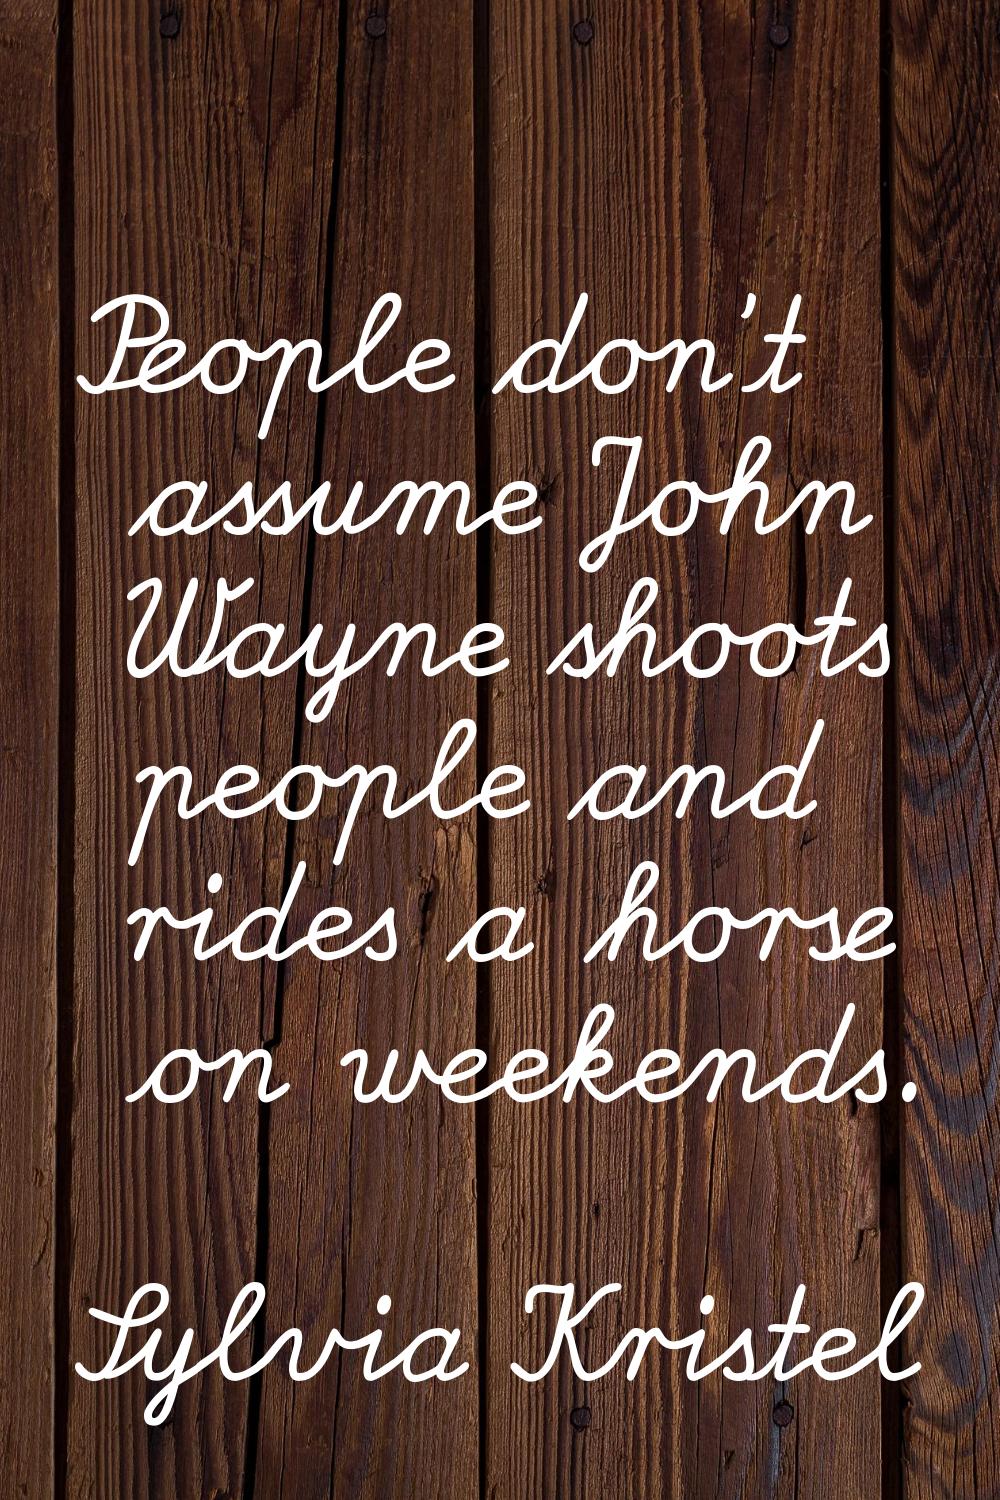 People don't assume John Wayne shoots people and rides a horse on weekends.